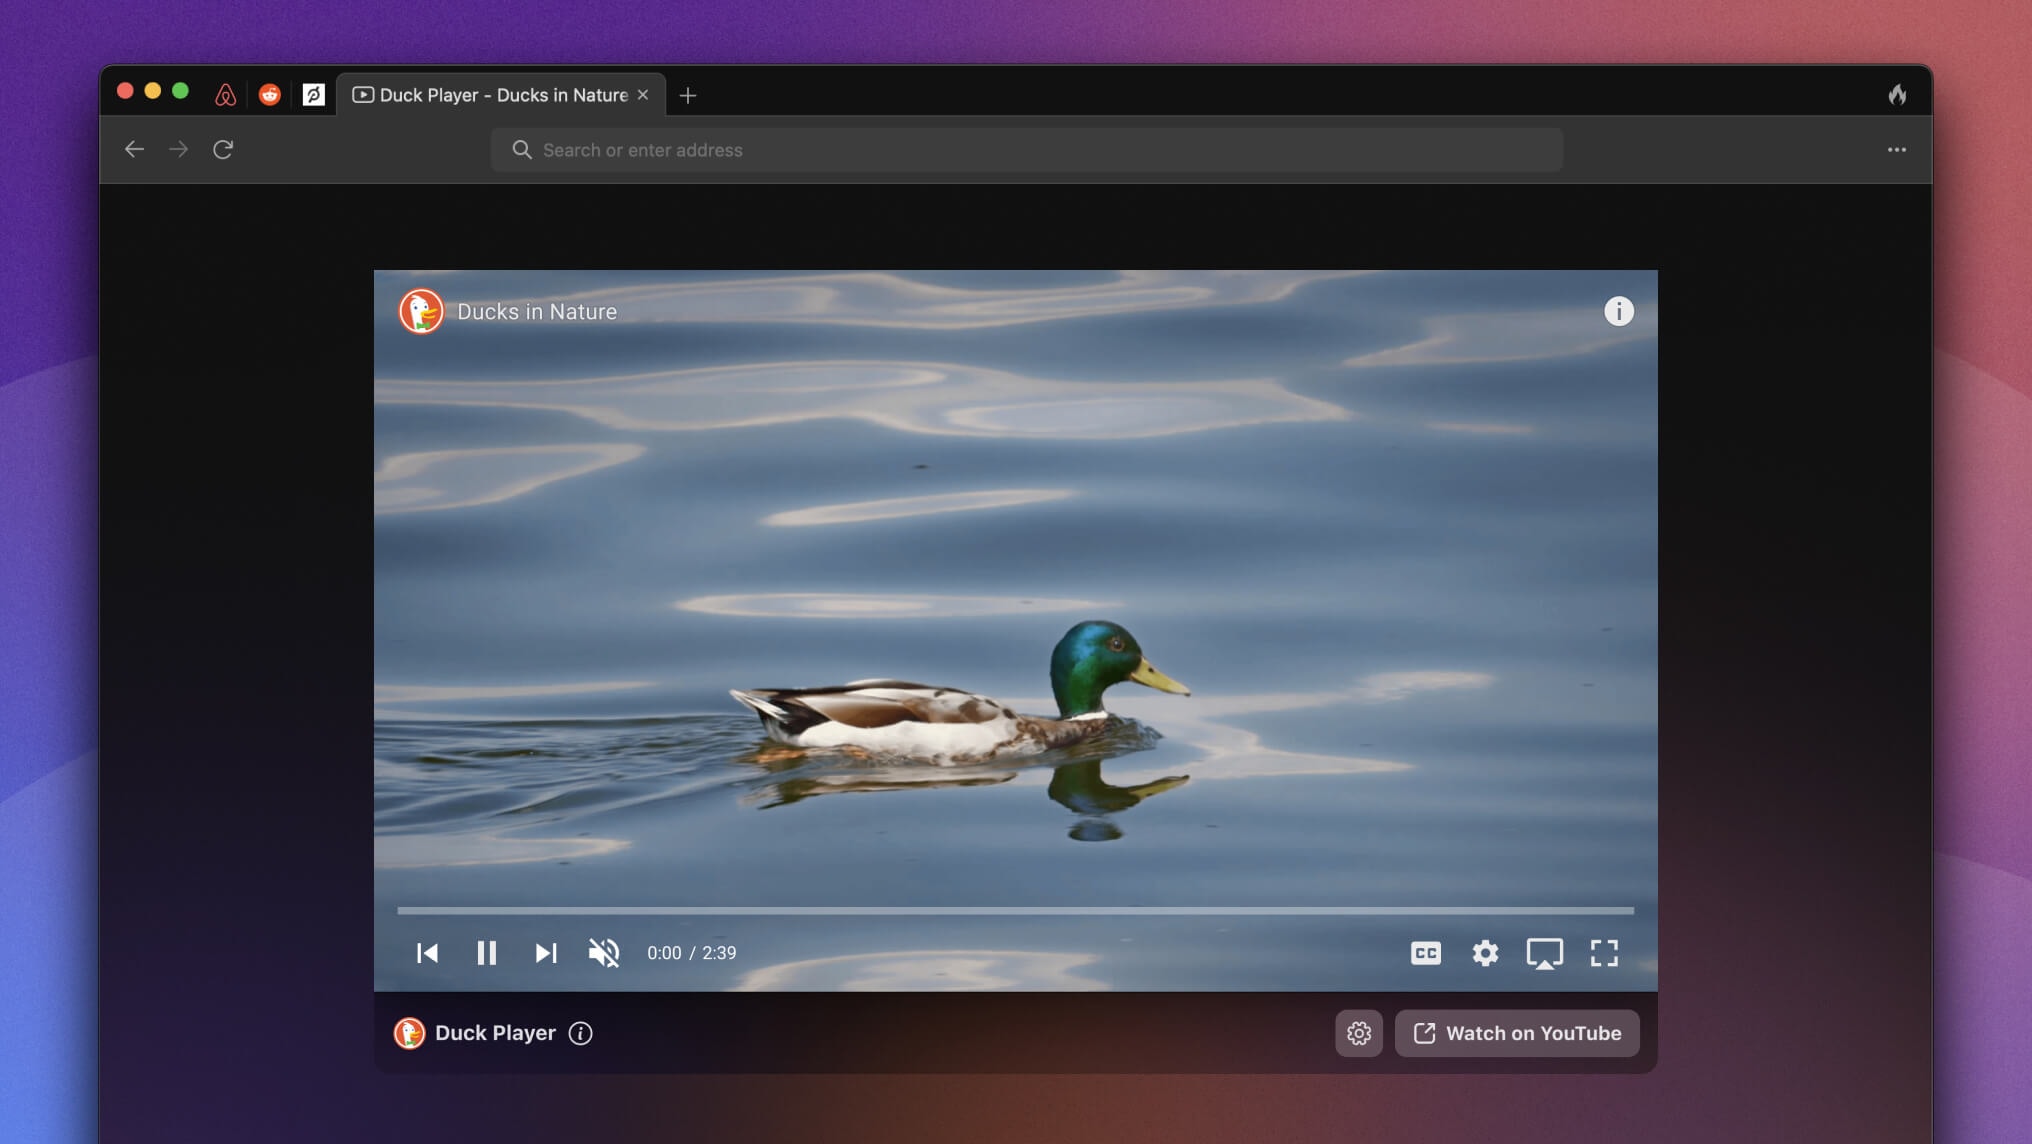 Watching YouTube privately using the Duck Player in the DuckDuckGo browser on macOS